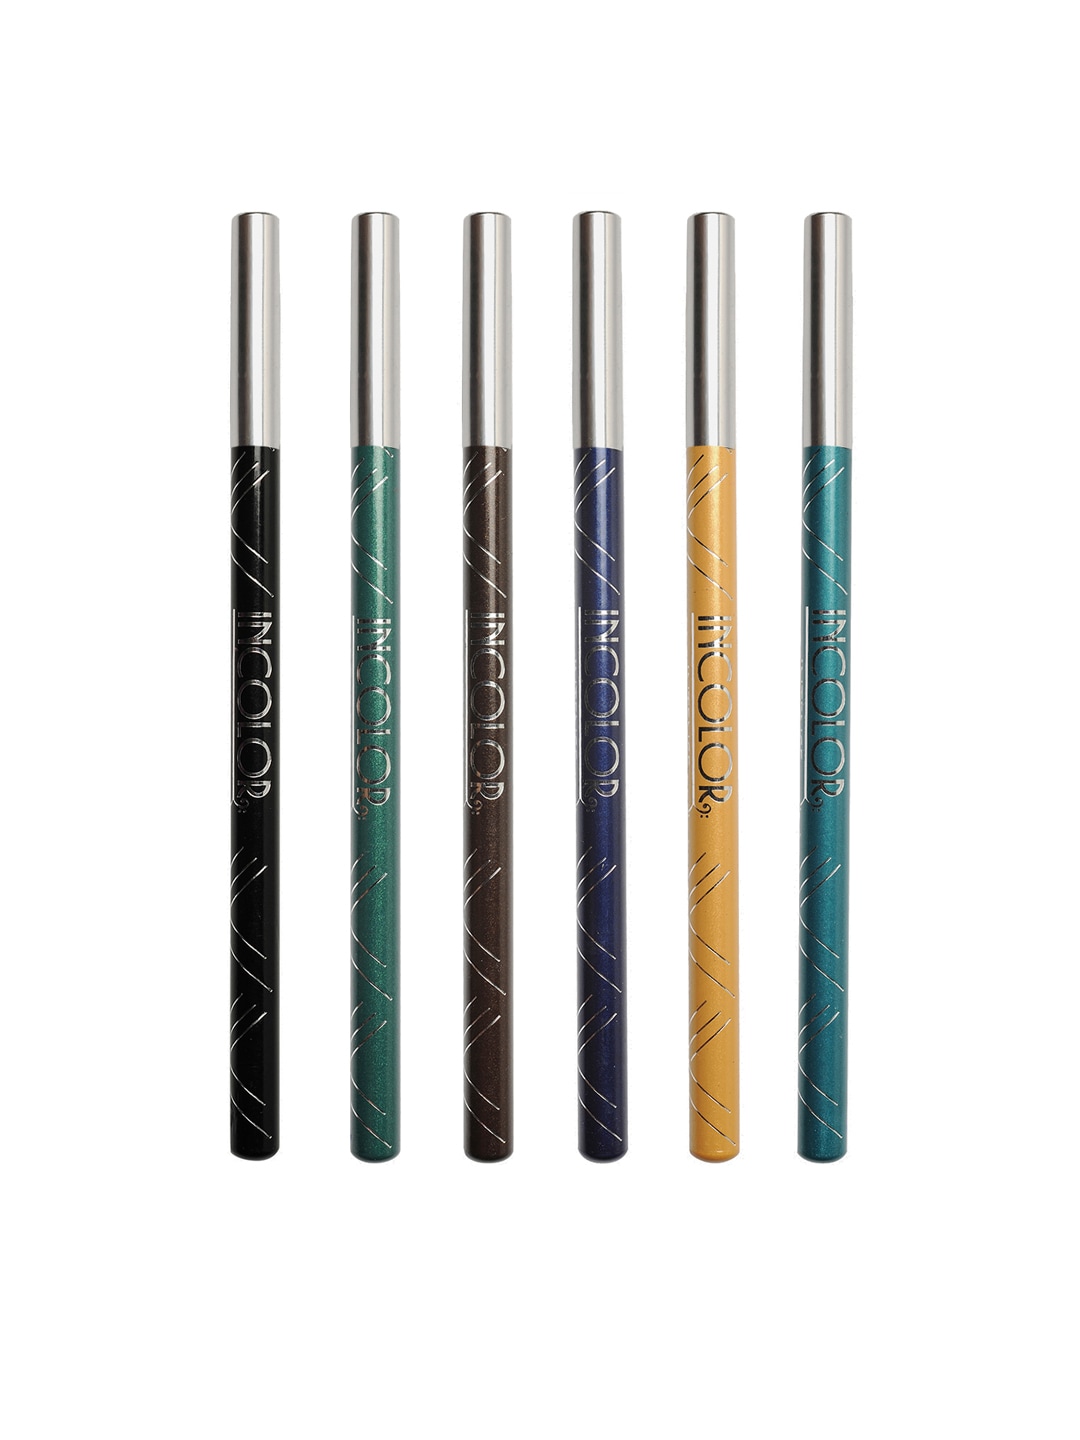 INCOLOR Pack Of 6 Intense Long-wear Eye Pencils Price in India